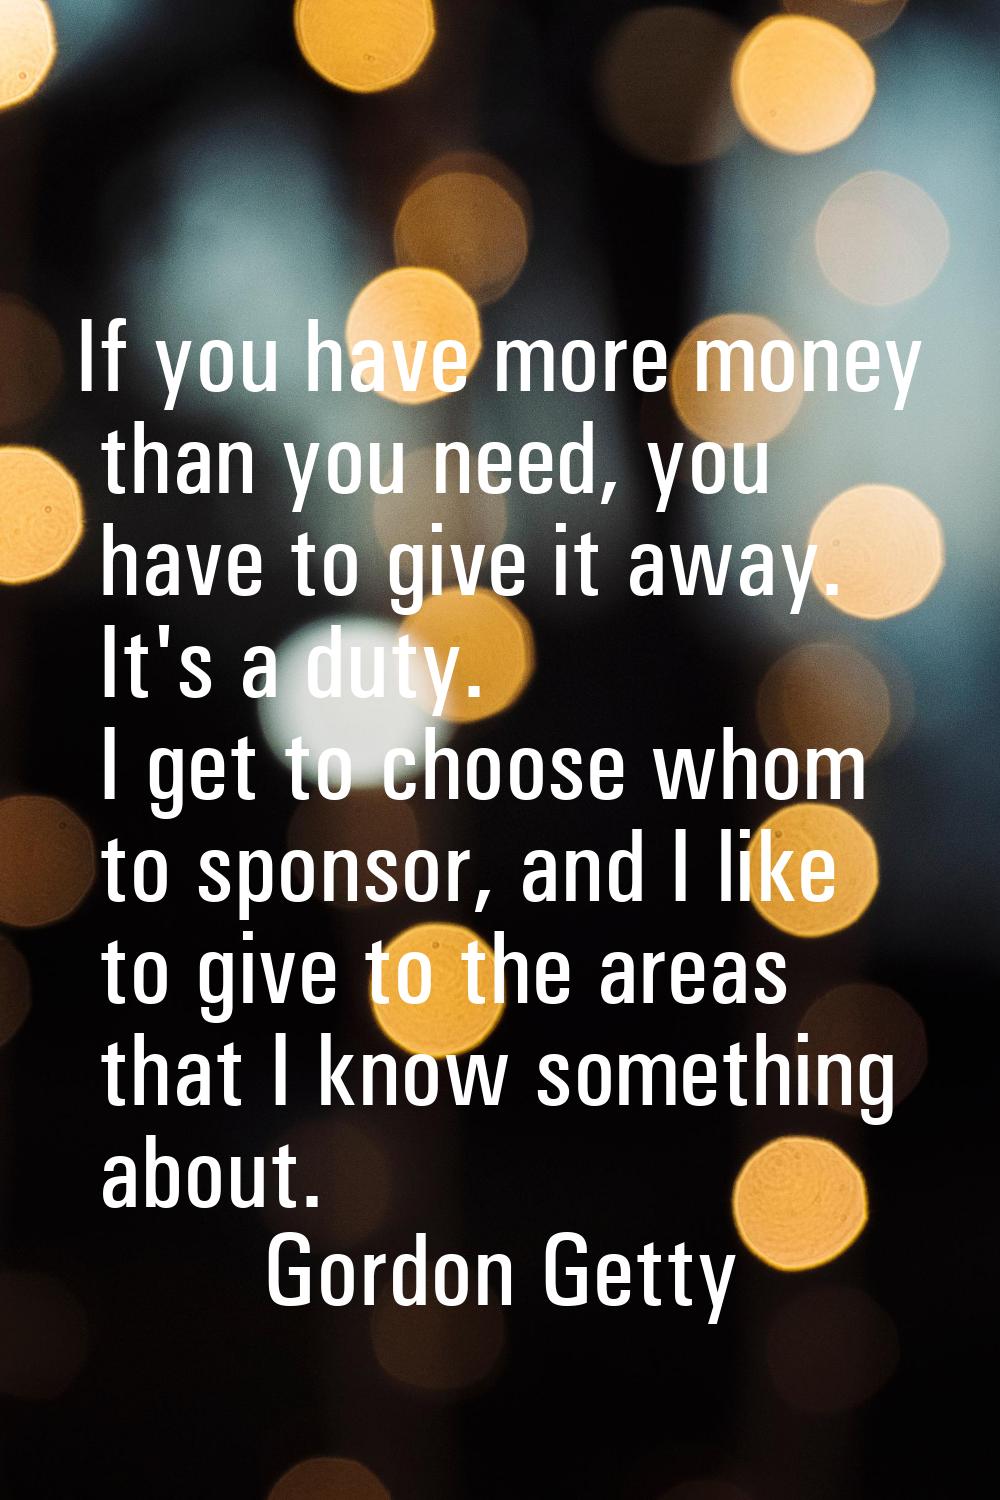 If you have more money than you need, you have to give it away. It's a duty. I get to choose whom t